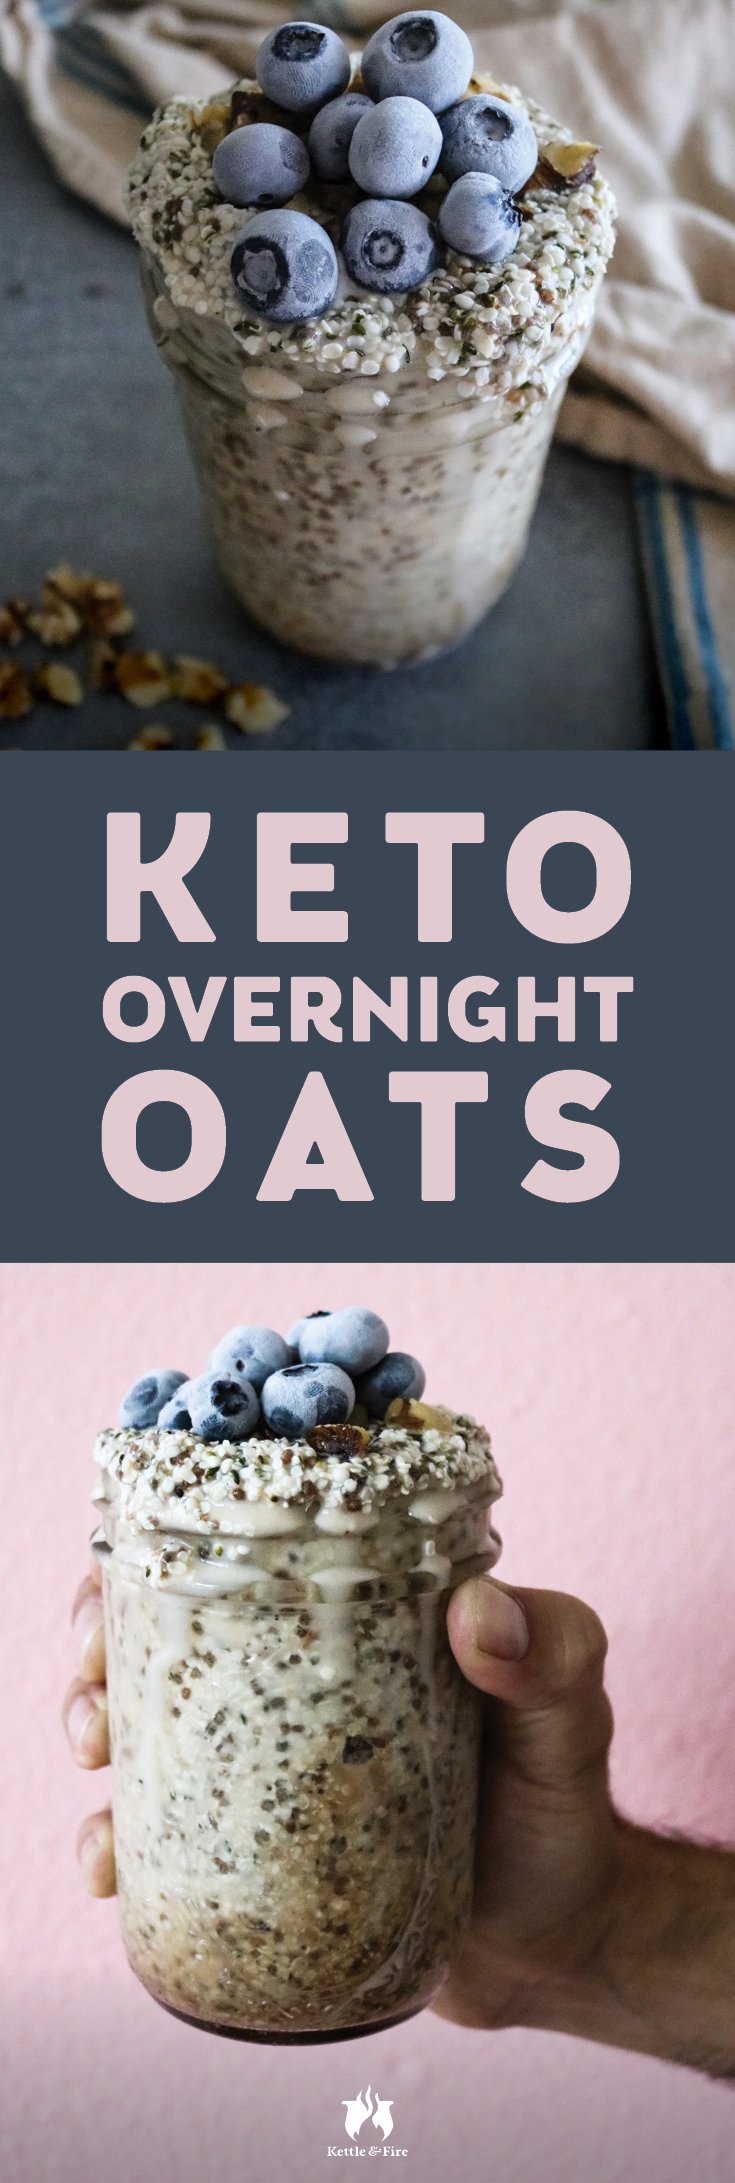 Keto Overnight "Oats" with Coconut and Blueberries